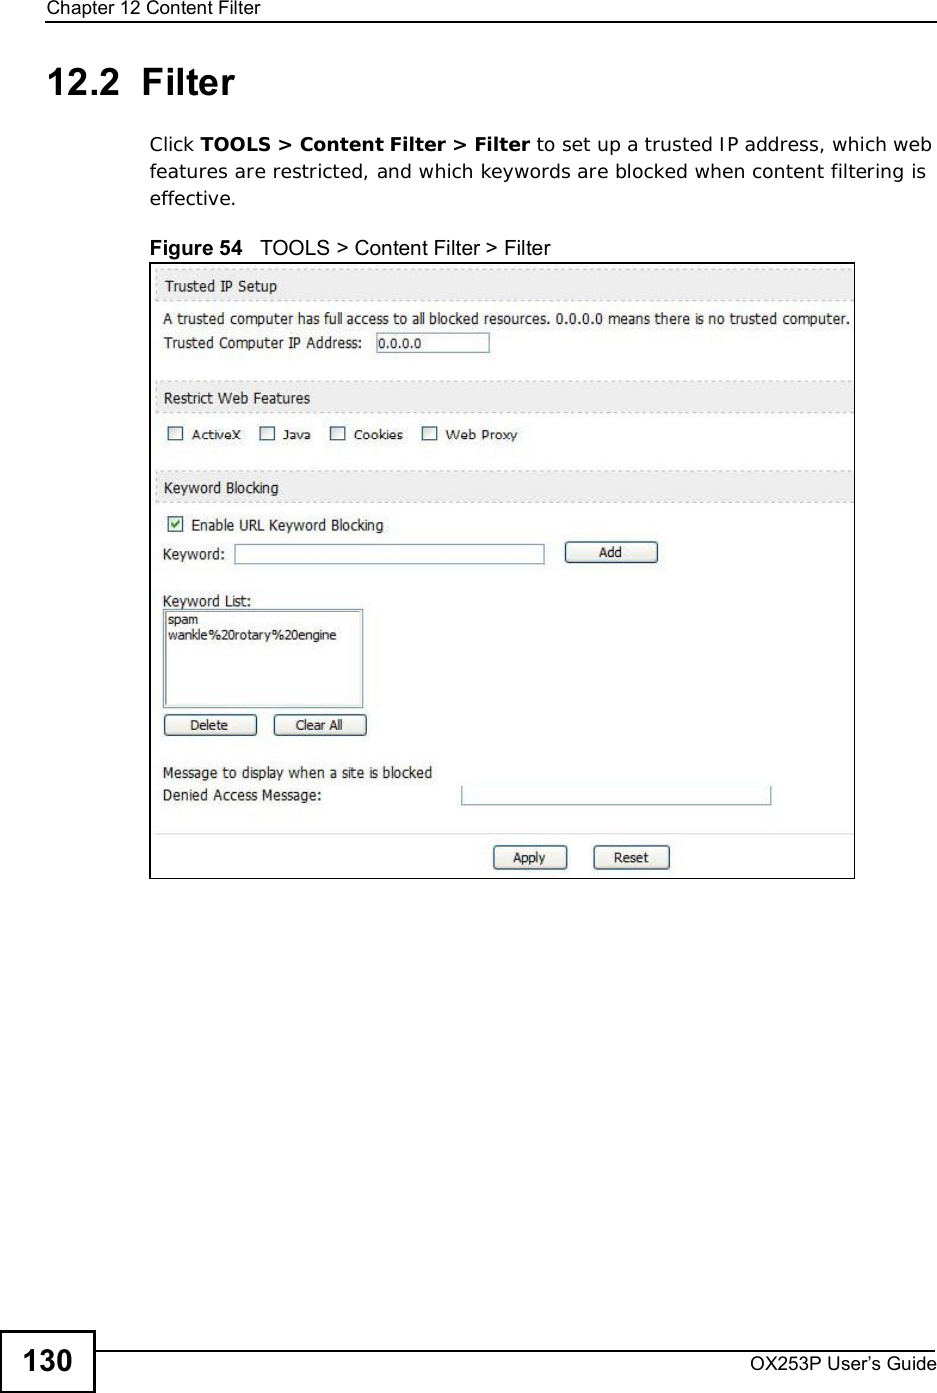 Chapter 12Content FilterOX253P User’s Guide13012.2  FilterClick TOOLS &gt; Content Filter &gt; Filter to set up a trusted IP address, which web features are restricted, and which keywords are blocked when content filtering is effective.Figure 54   TOOLS &gt; Content Filter &gt; Filter